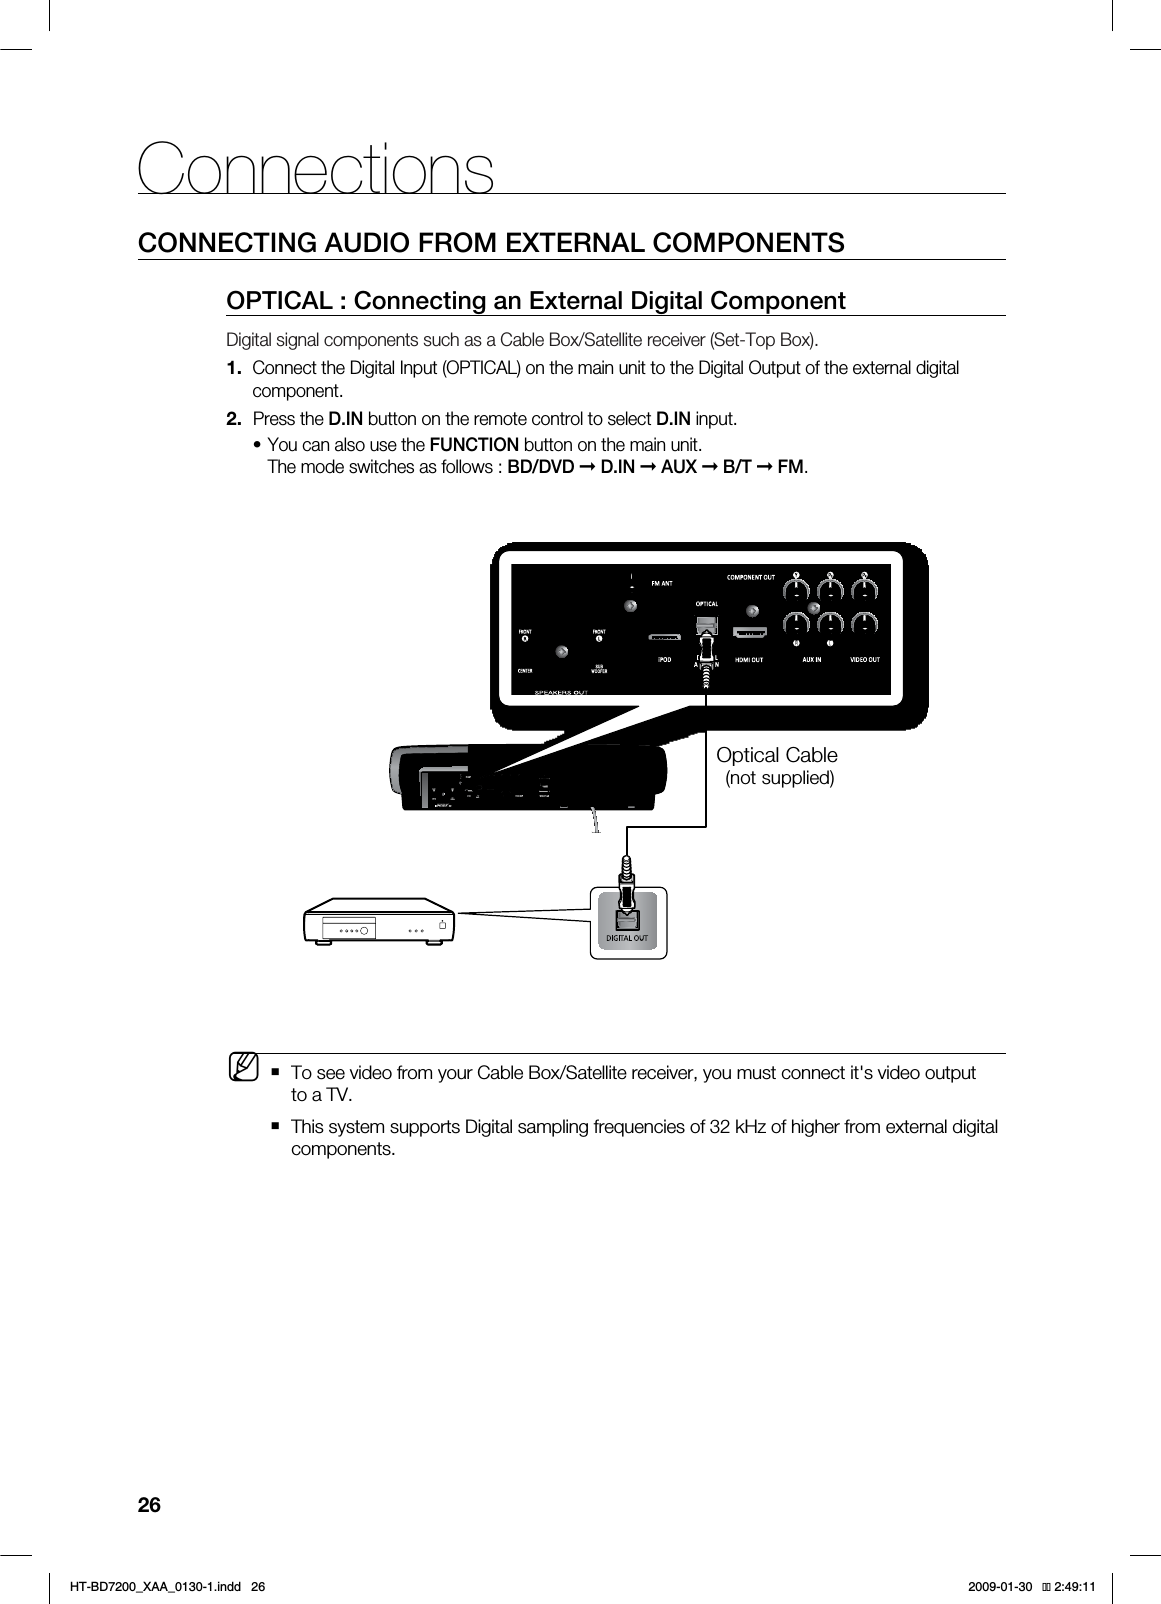 26ConnectionsCONNECTING AUDIO FROM EXTERNAL COMPONENTSOPTICAL : Connecting an External Digital ComponentDigital signal components such as a Cable Box/Satellite receiver (Set-Top Box).     Connect the Digital Input (OPTICAL) on the main unit to the Digital Output of the external digital component. Press the D.IN button on the remote control to select D.IN input.You can also use the FUNCTION button on the main unit.The mode switches as follows : BD/DVD ➞ D.IN ➞AUX ➞B/T ➞FM.To see video from your Cable Box/Satellite receiver, you must connect it&apos;s video output to a TV.This system supports Digital sampling frequencies of 32 kHz of higher from external digital components.1.2.•MOptical Cable (not supplied)HT-BD7200_XAA_0130-1.indd   26 